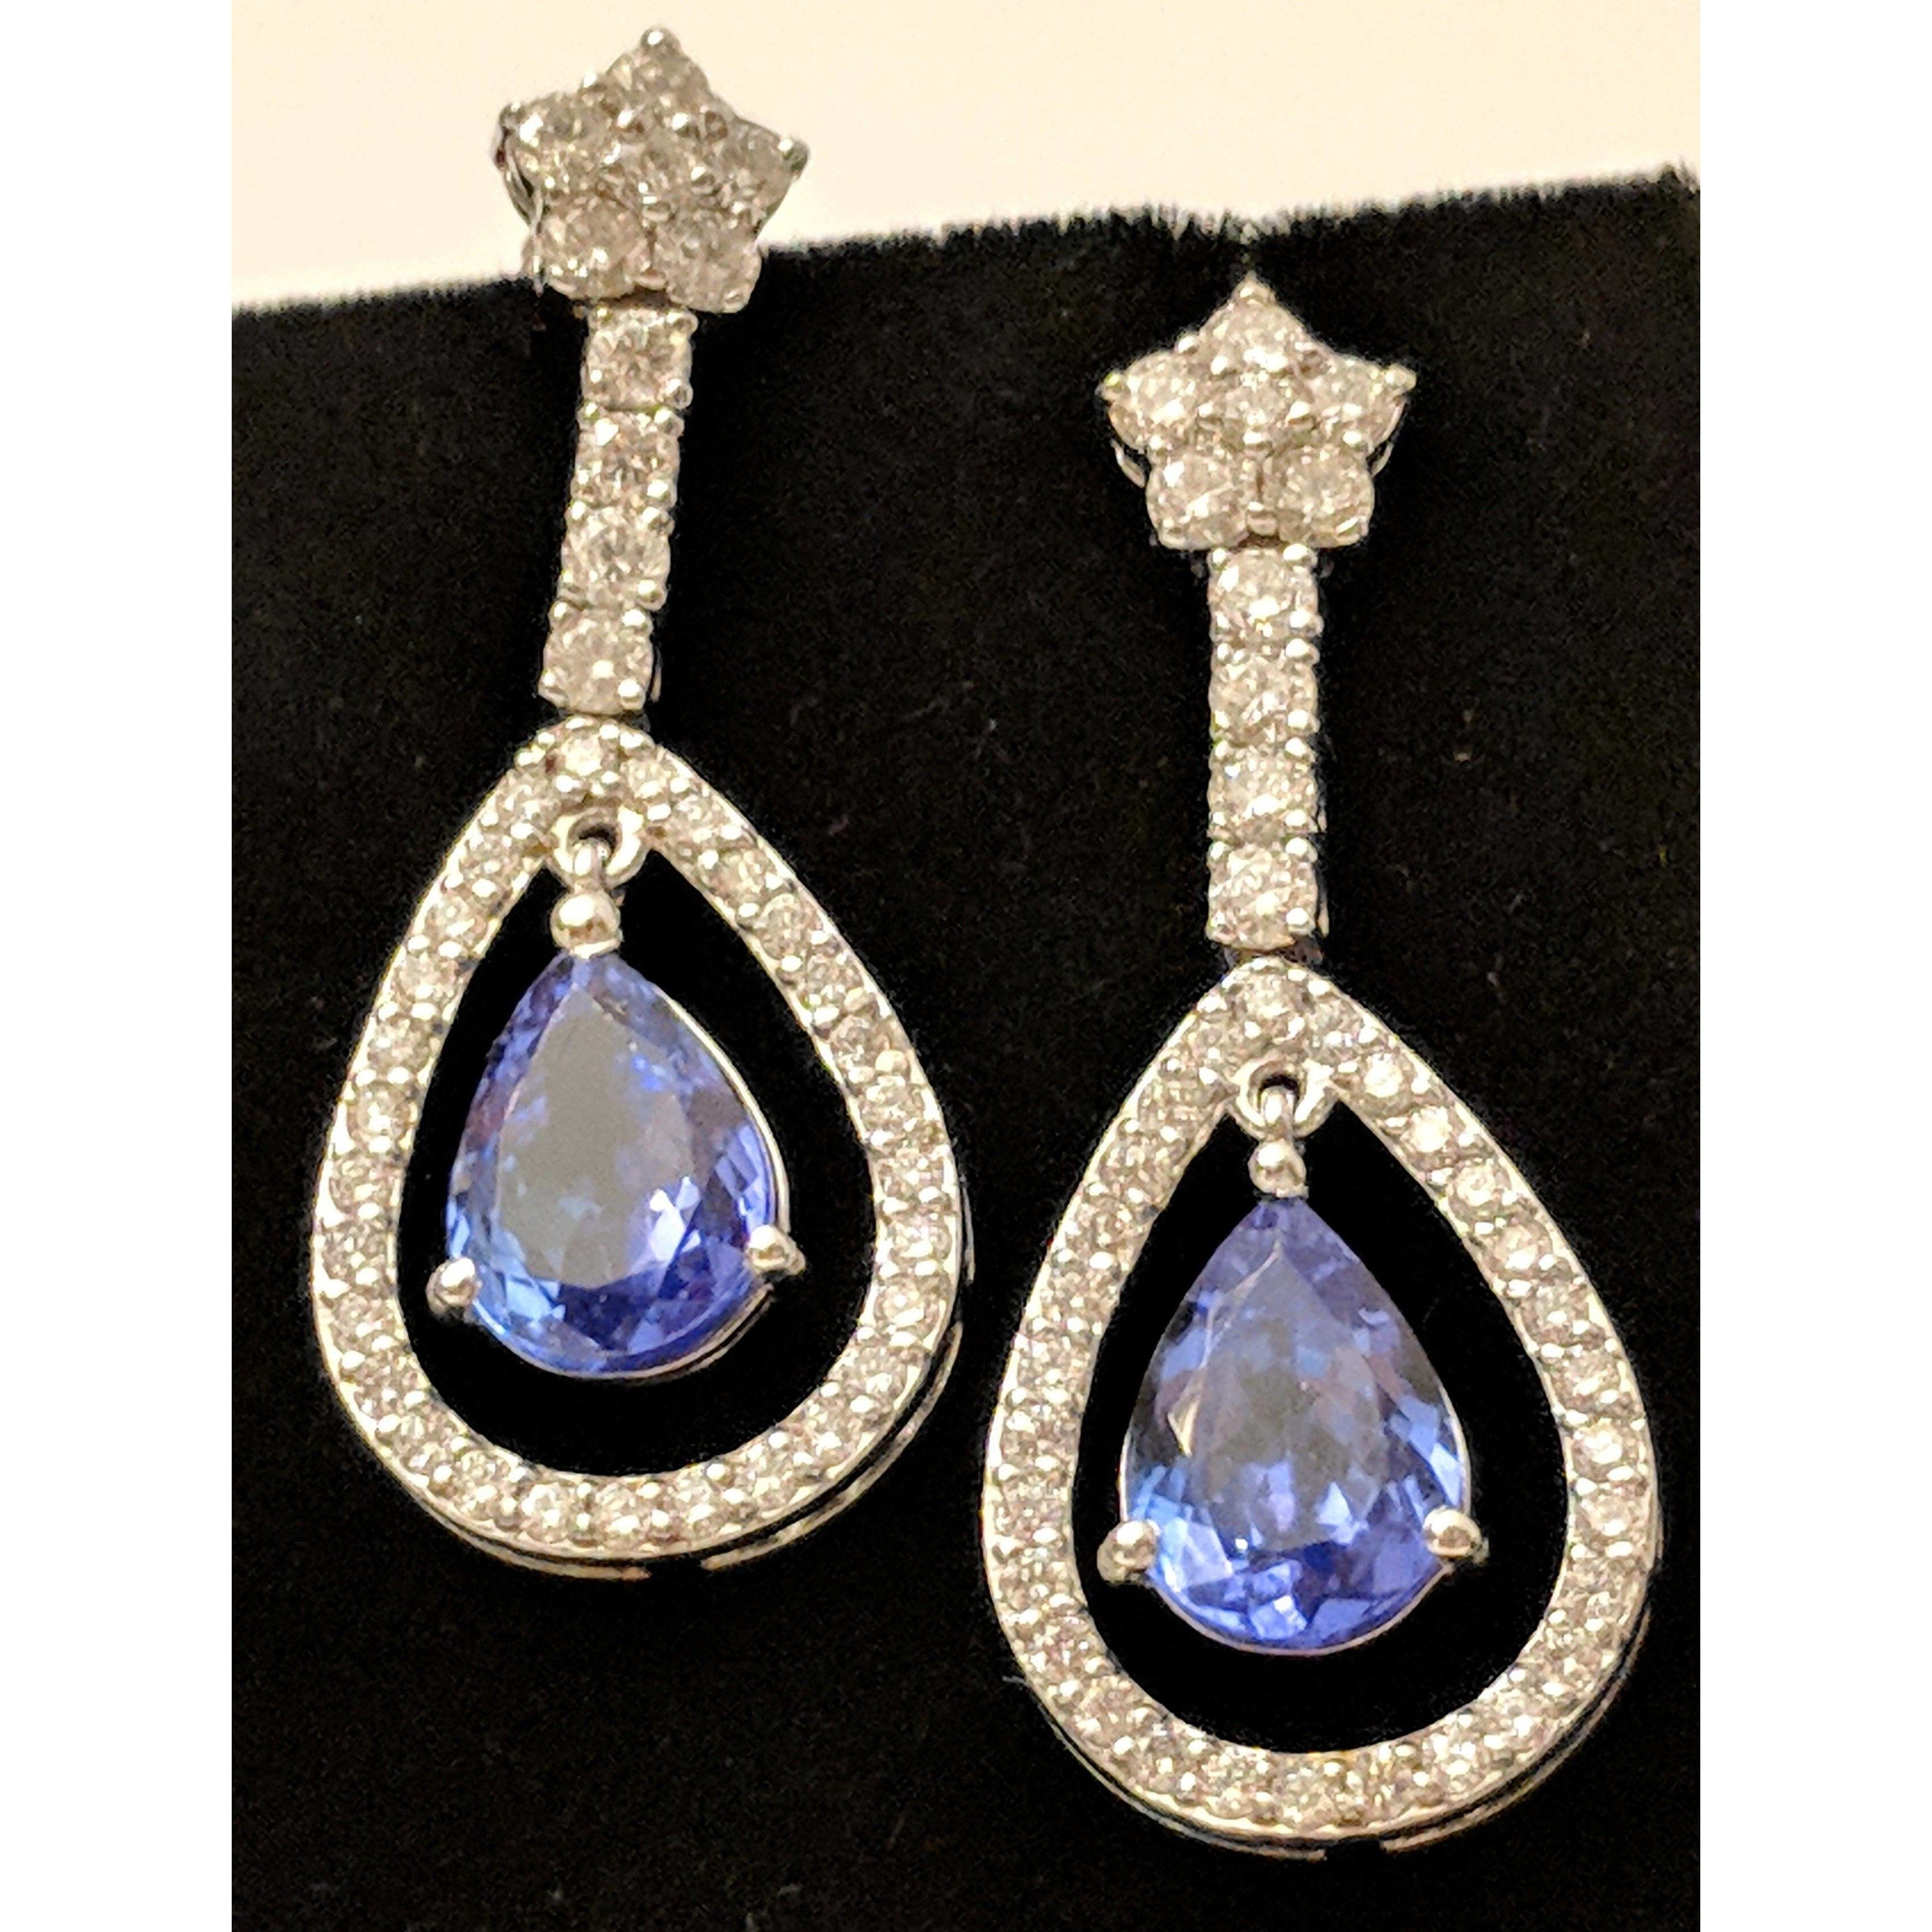 Tanzanite and Diamond Earrings, 14K Gold, Gorgeous and Rare 8ctw Tanzanite & Diamonds in 14K Gold - The Pink Pigs, A Compassionate Boutique